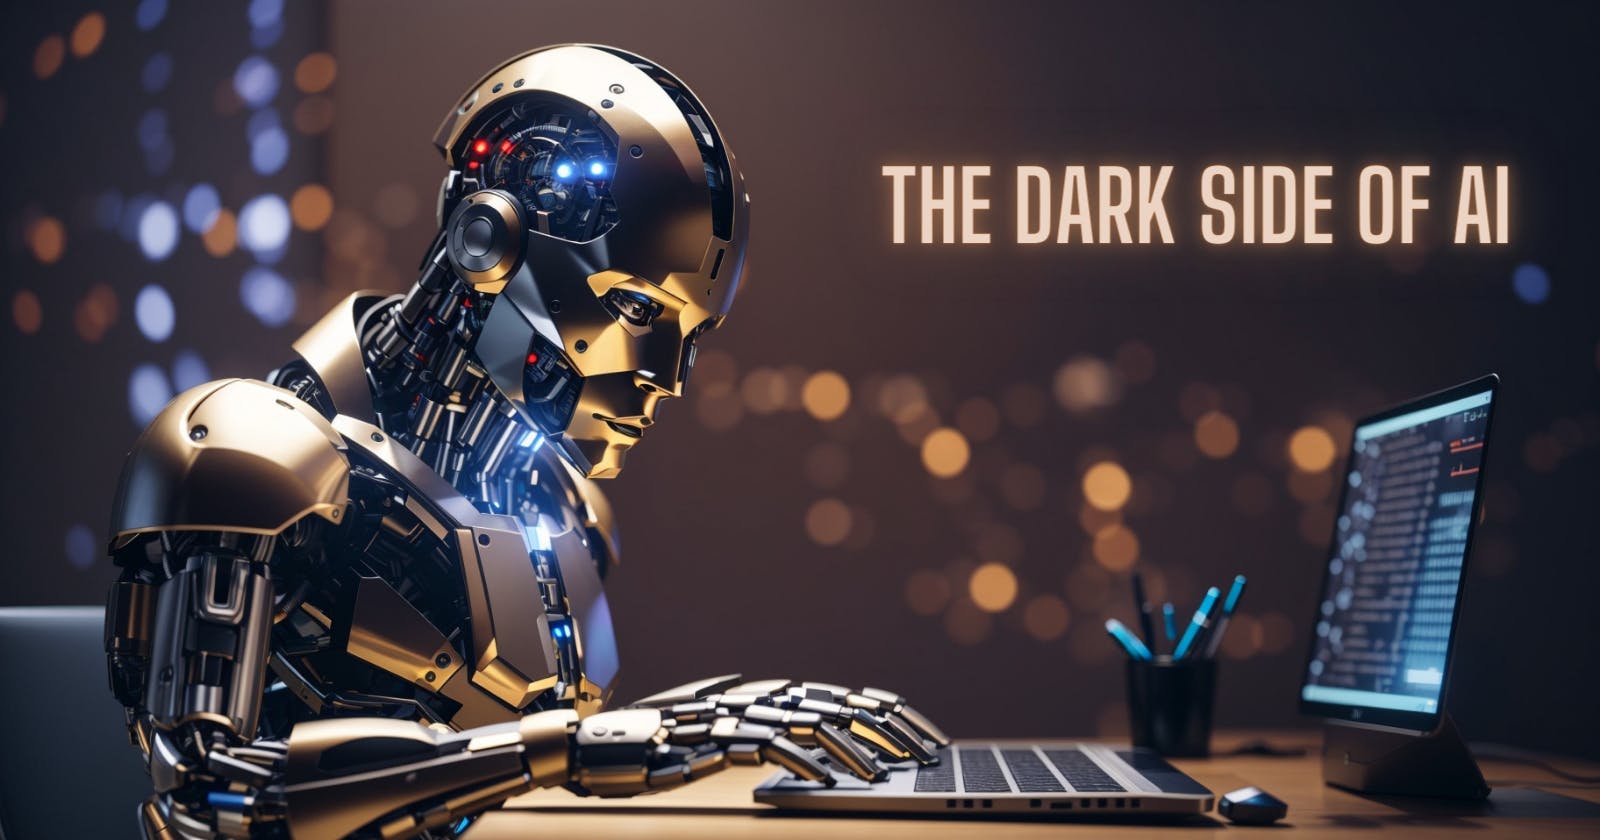 The Dark Side of AI